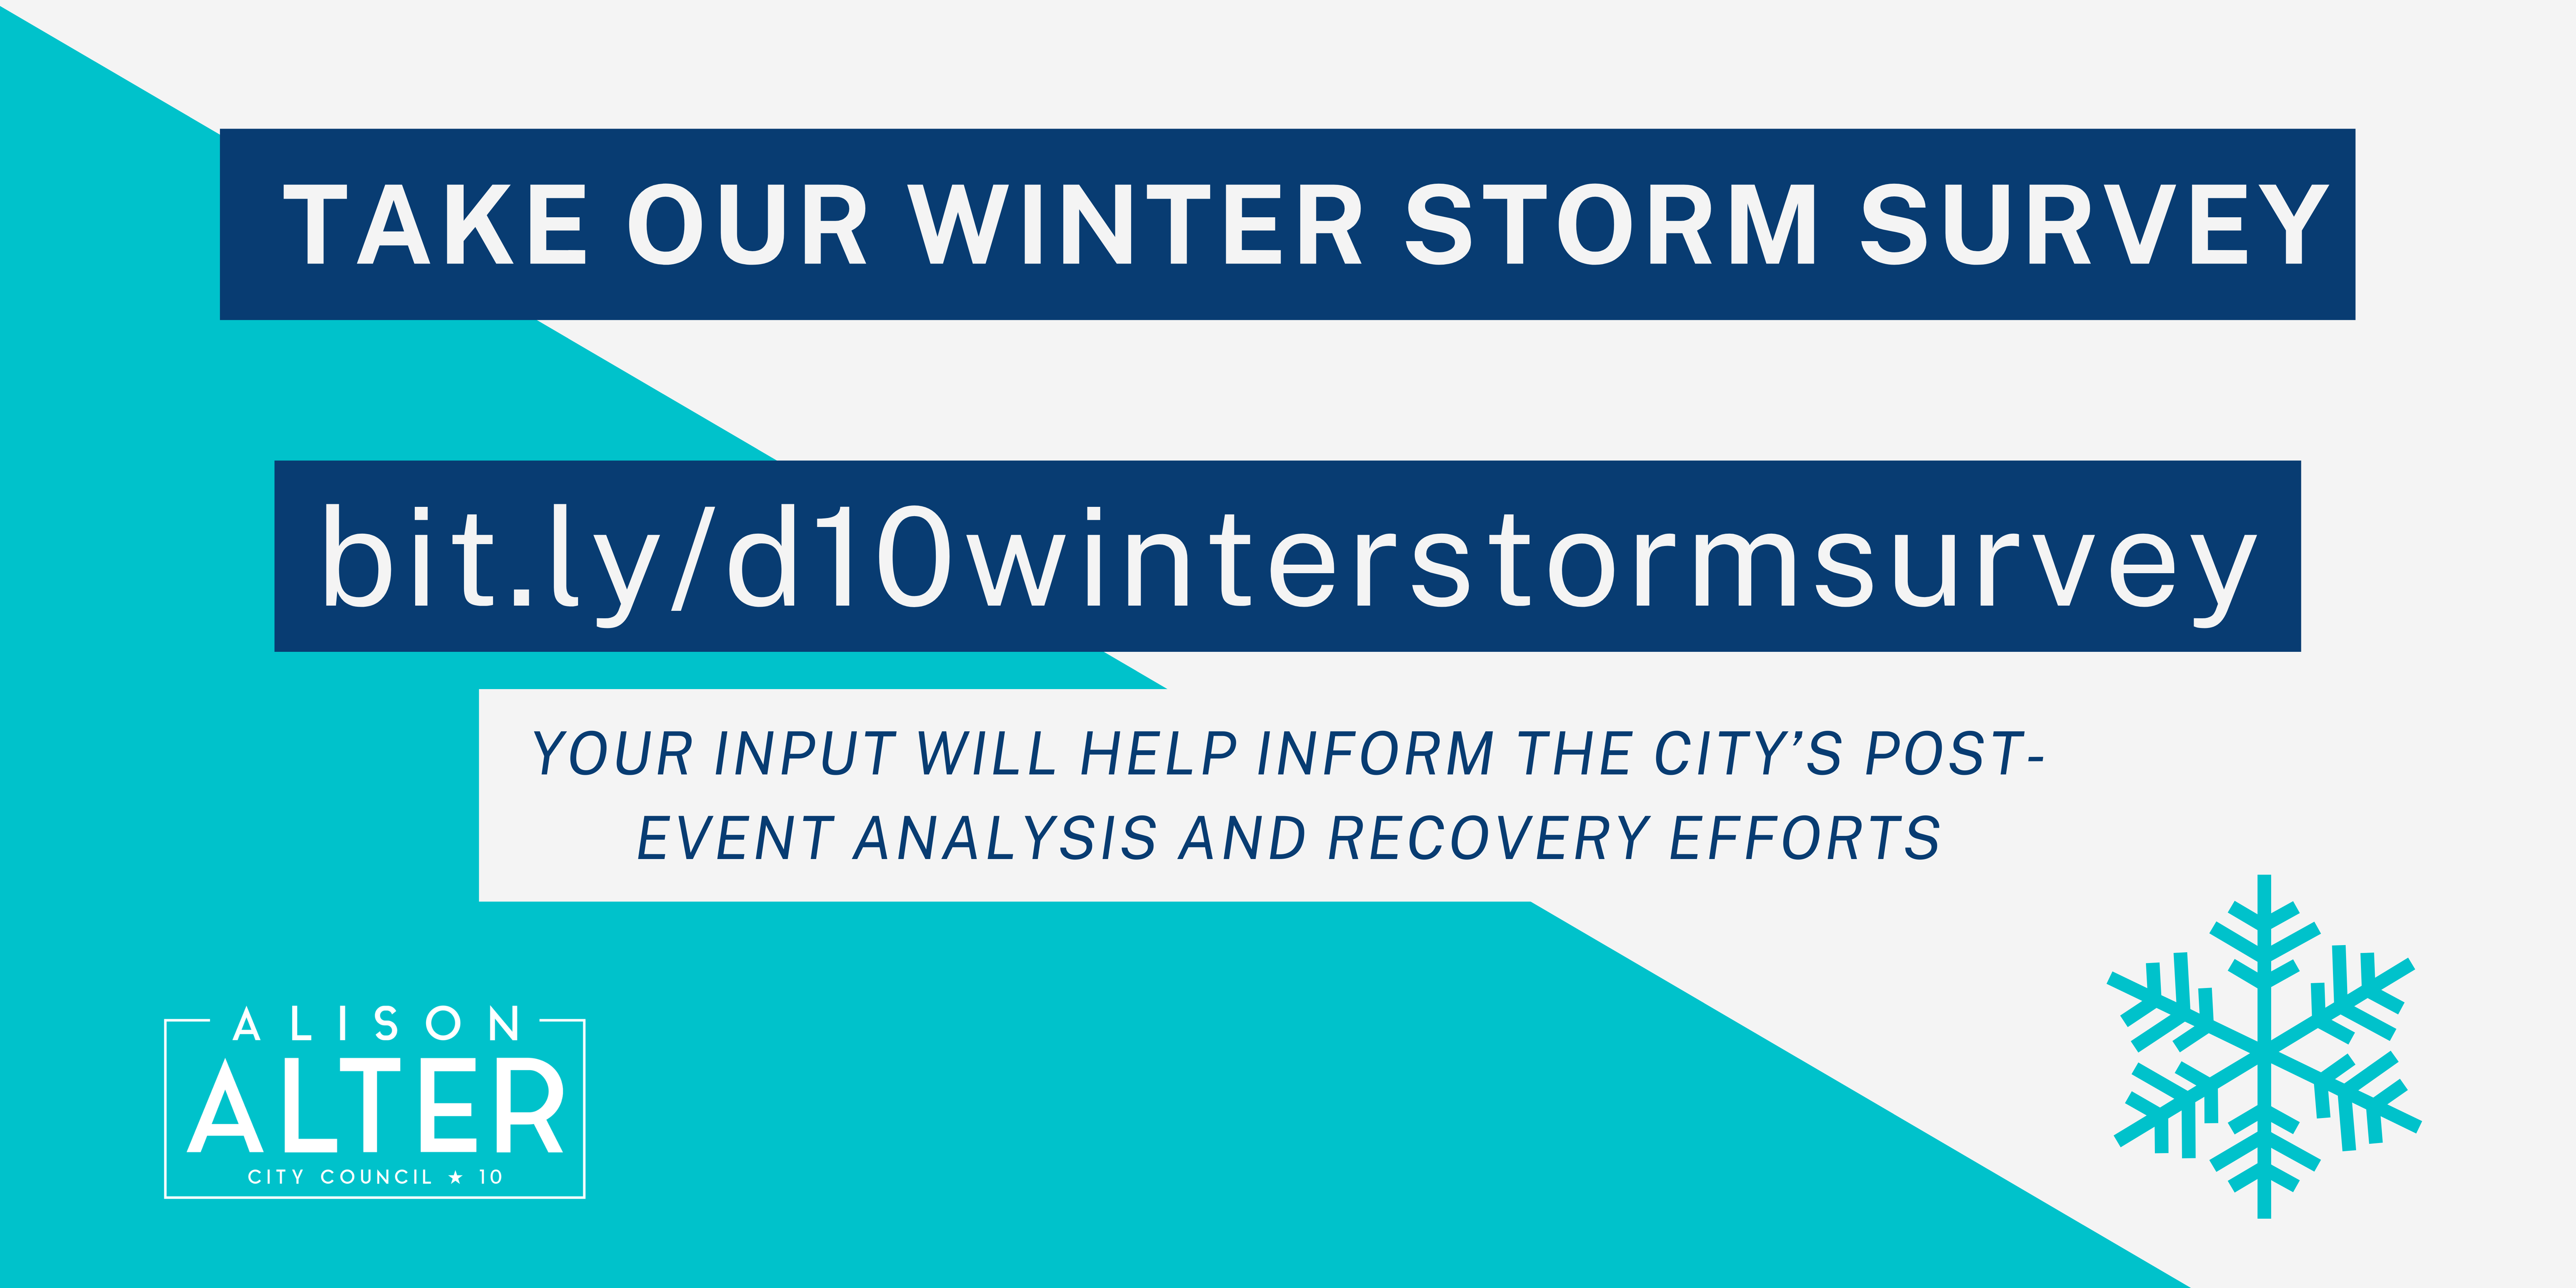 Take the district 10 winter storm survey. Click the image or go to bit.ly/d10winterstormsurvey